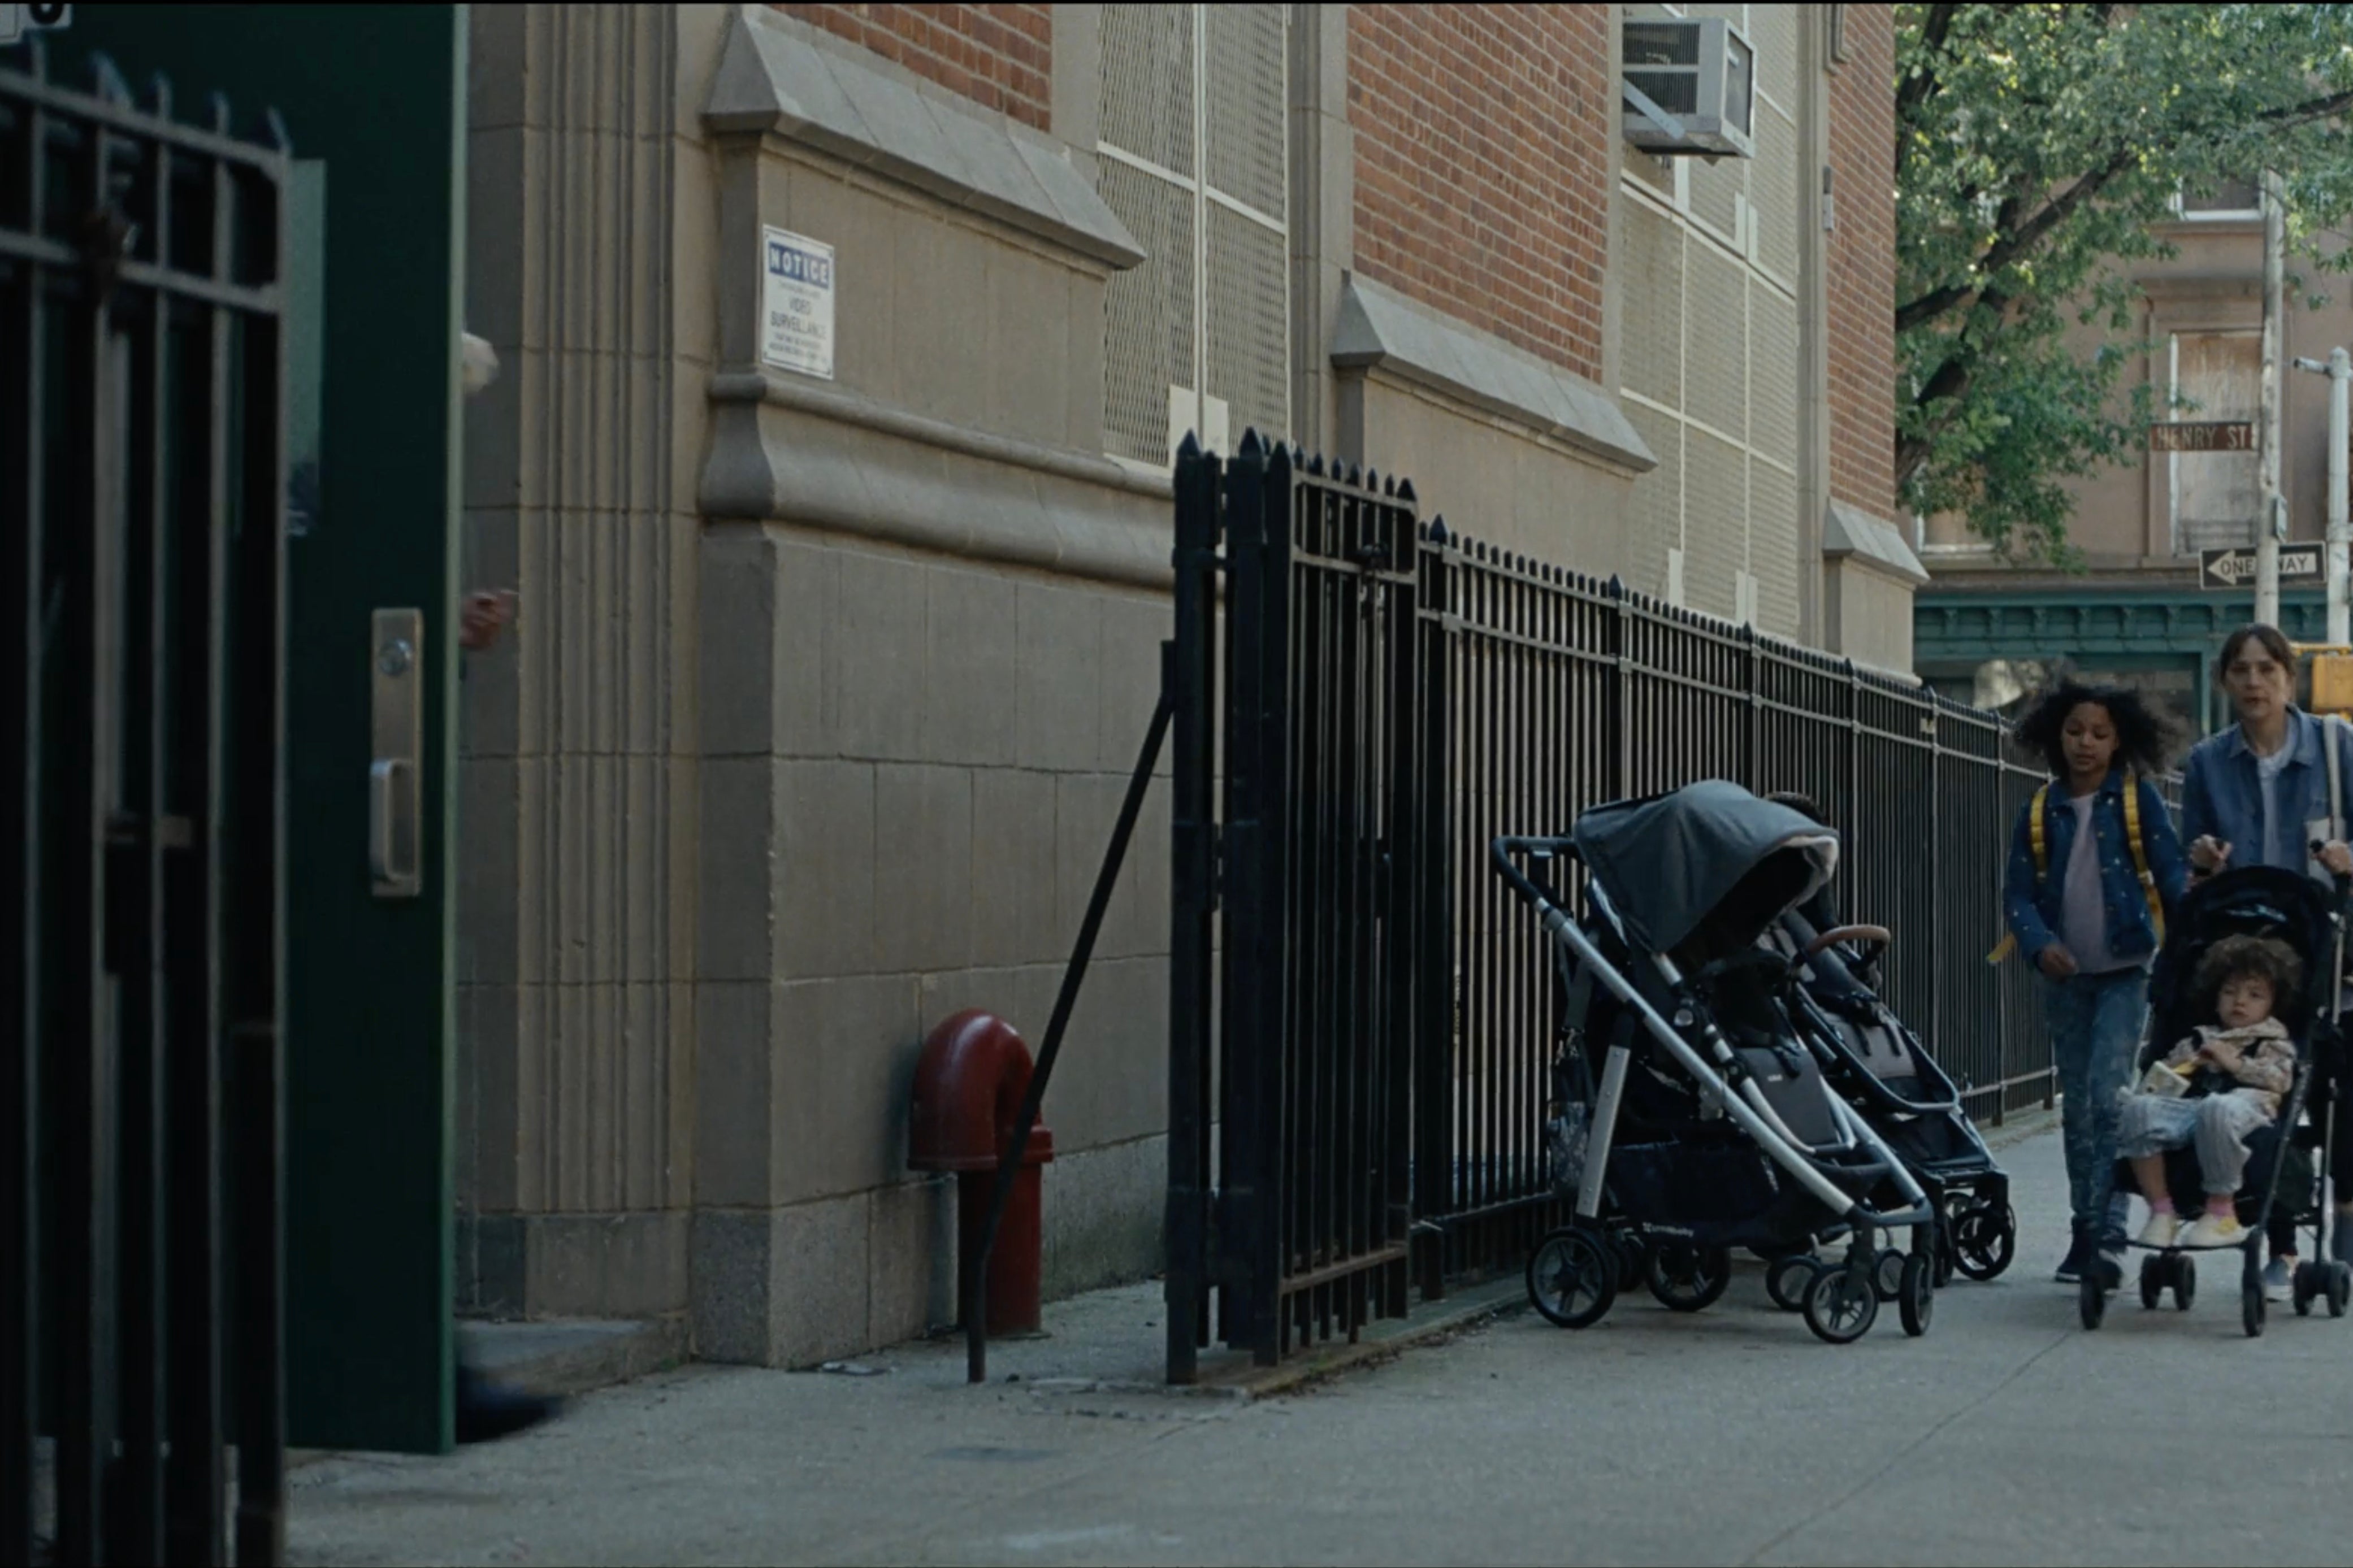 Rashida Jones pushes a stroller with a kid in it and a kid walking beside her down a city street